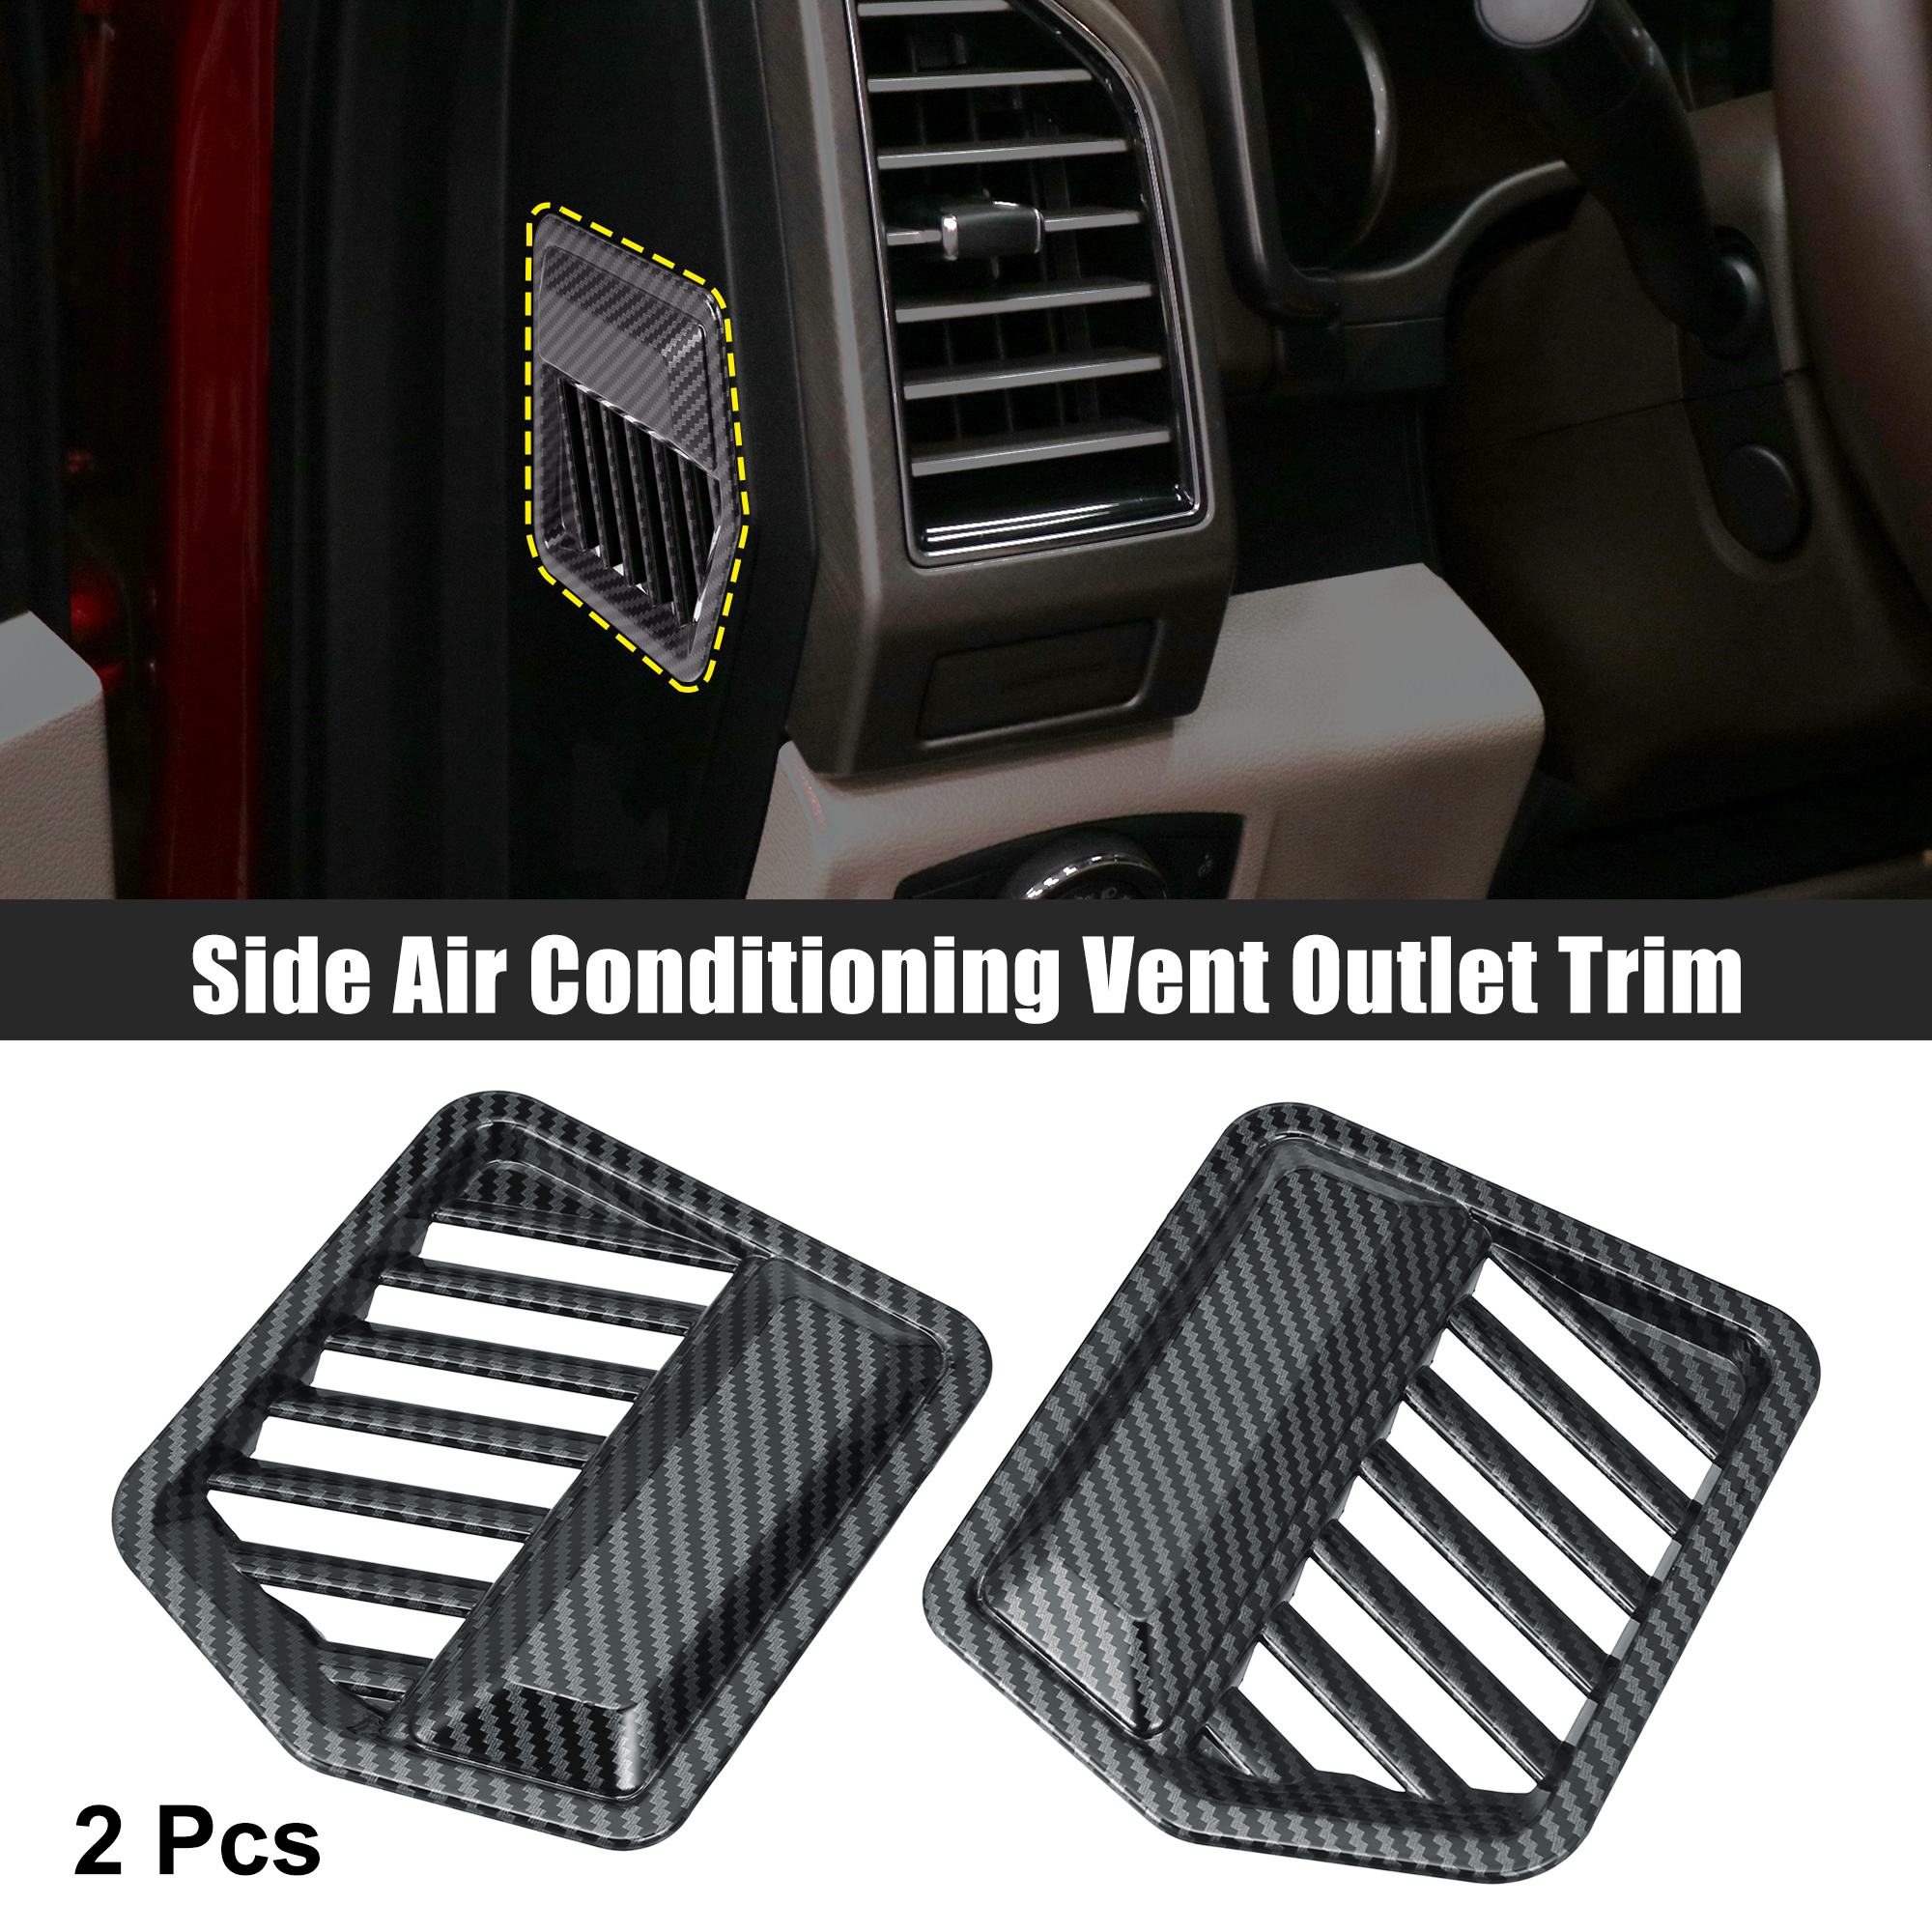 Unique Bargains 2 Pcs ABS Car Side Air Conditioning Vent Outlet Trim for Ford F-150 2015-2019